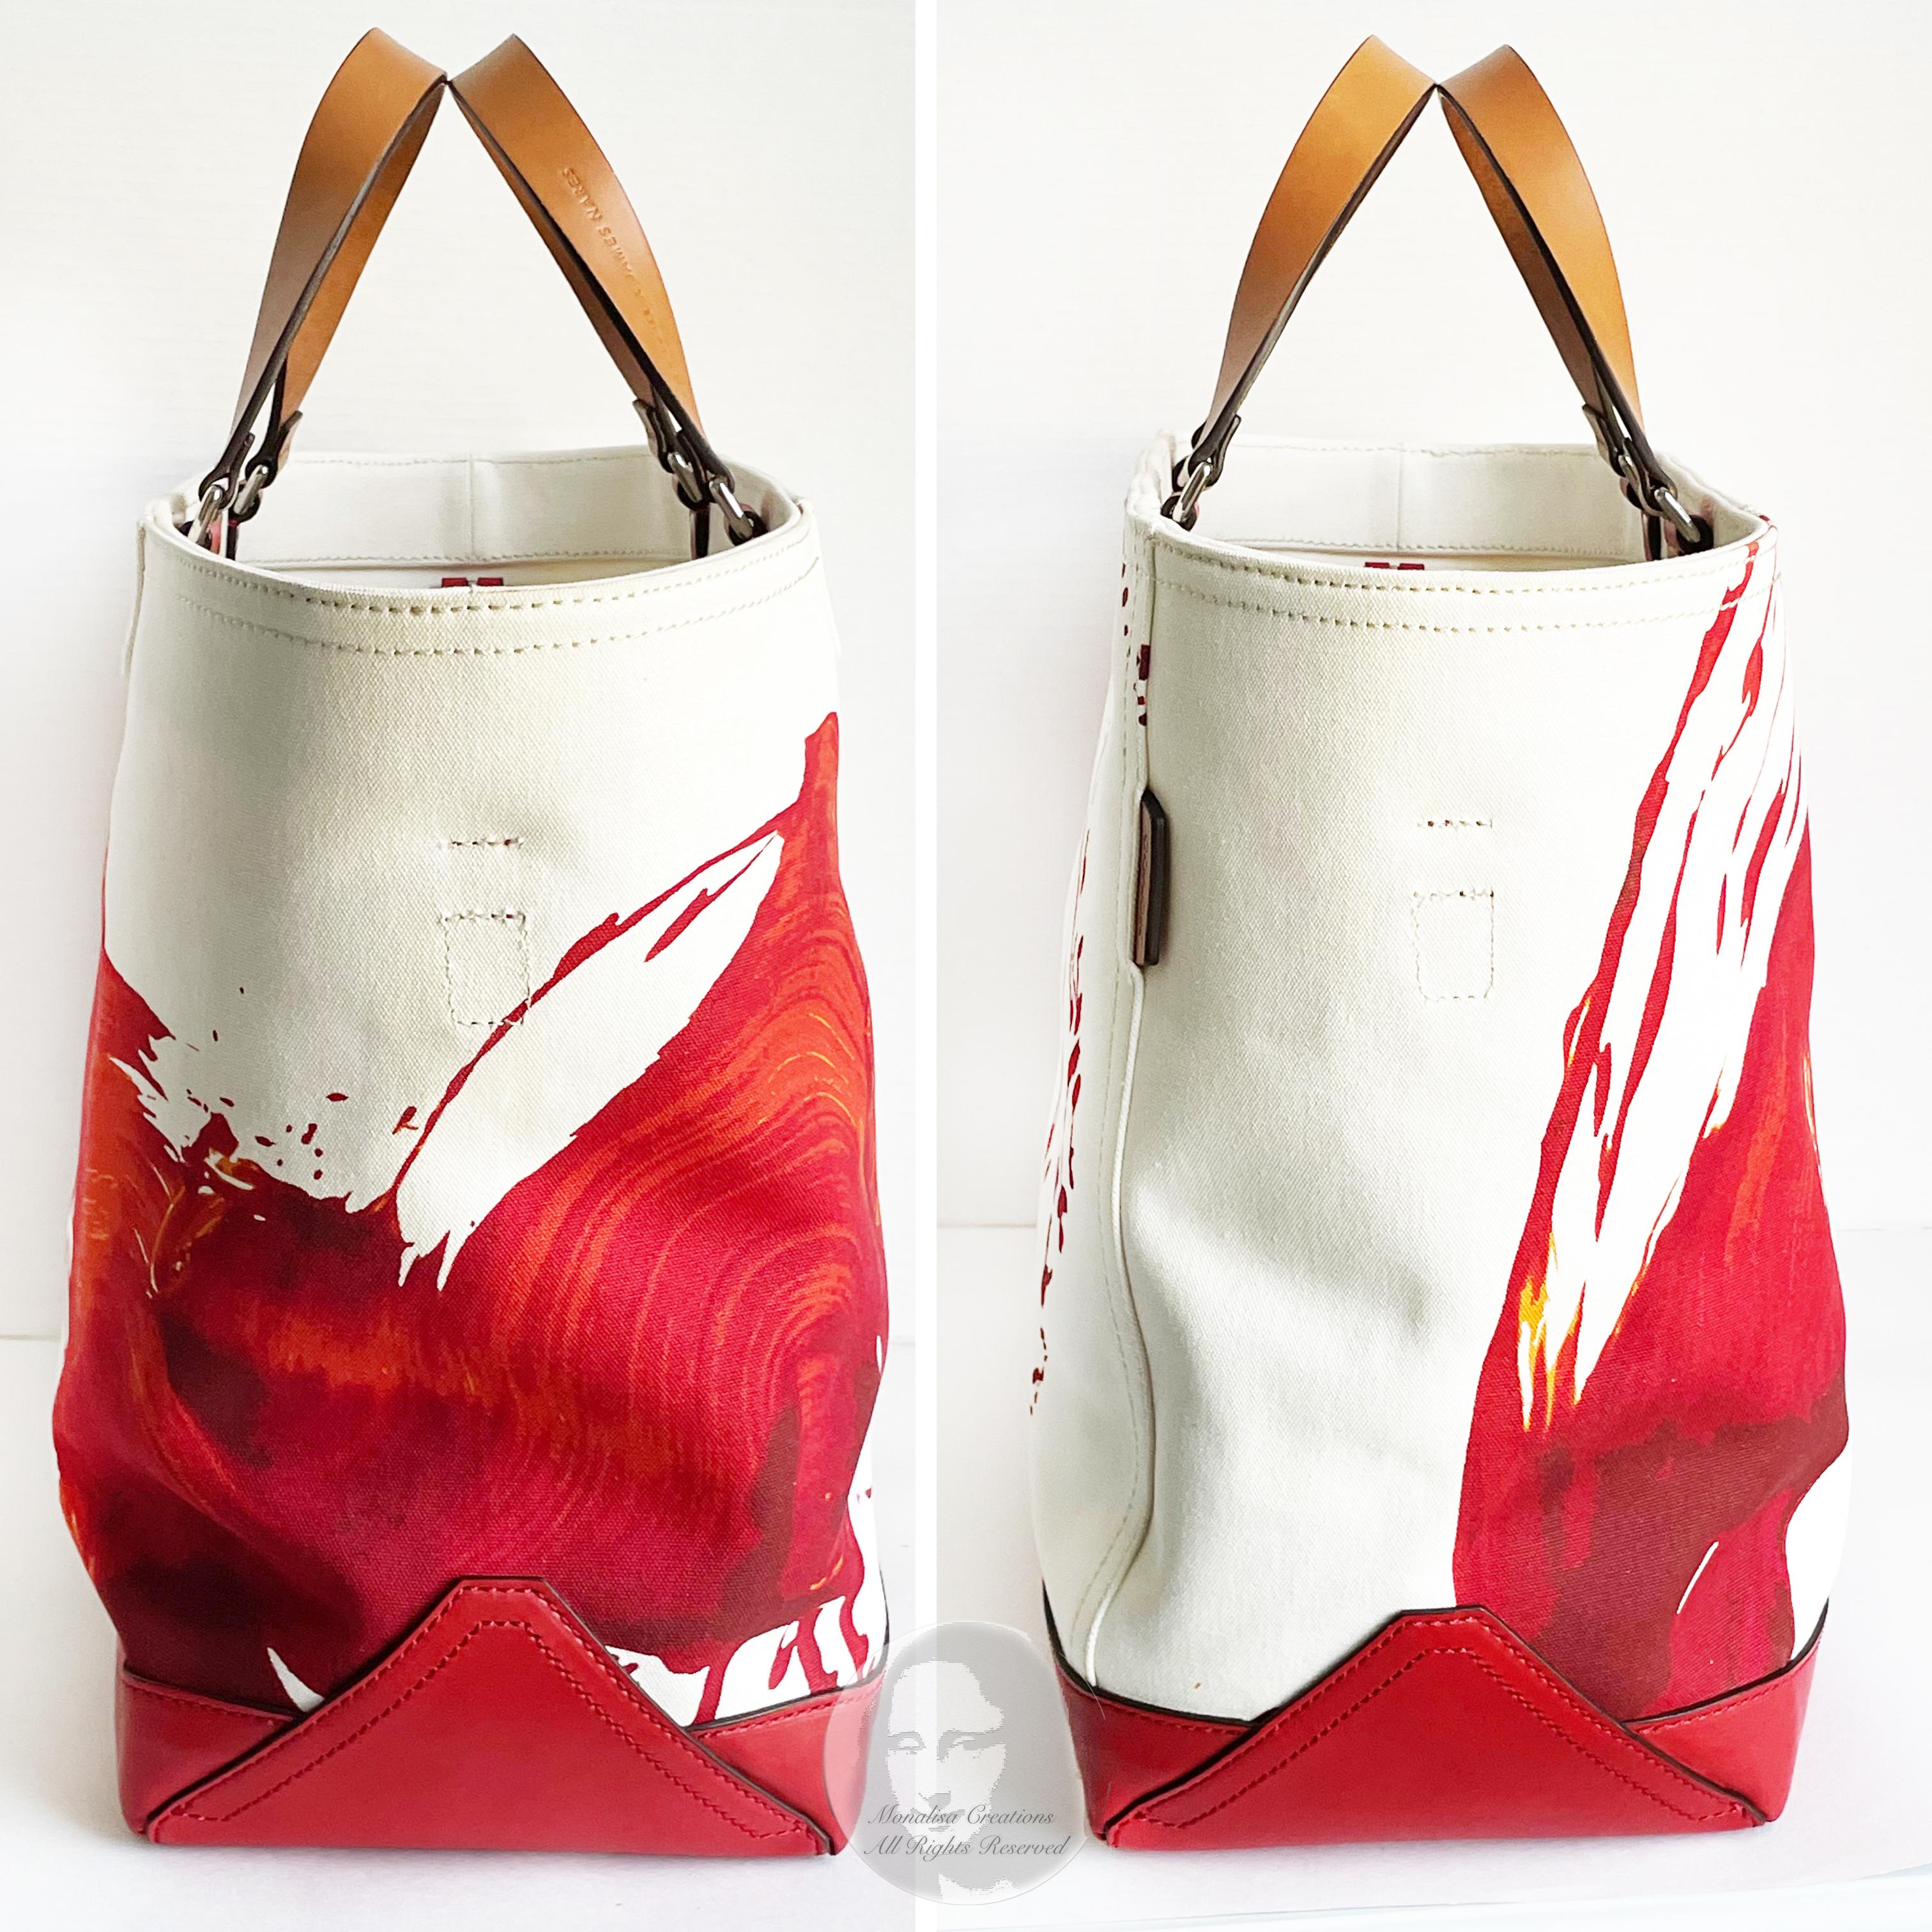 James Nares x Coach Tote Bag XL Crossbody 2012 Limited Edition  2